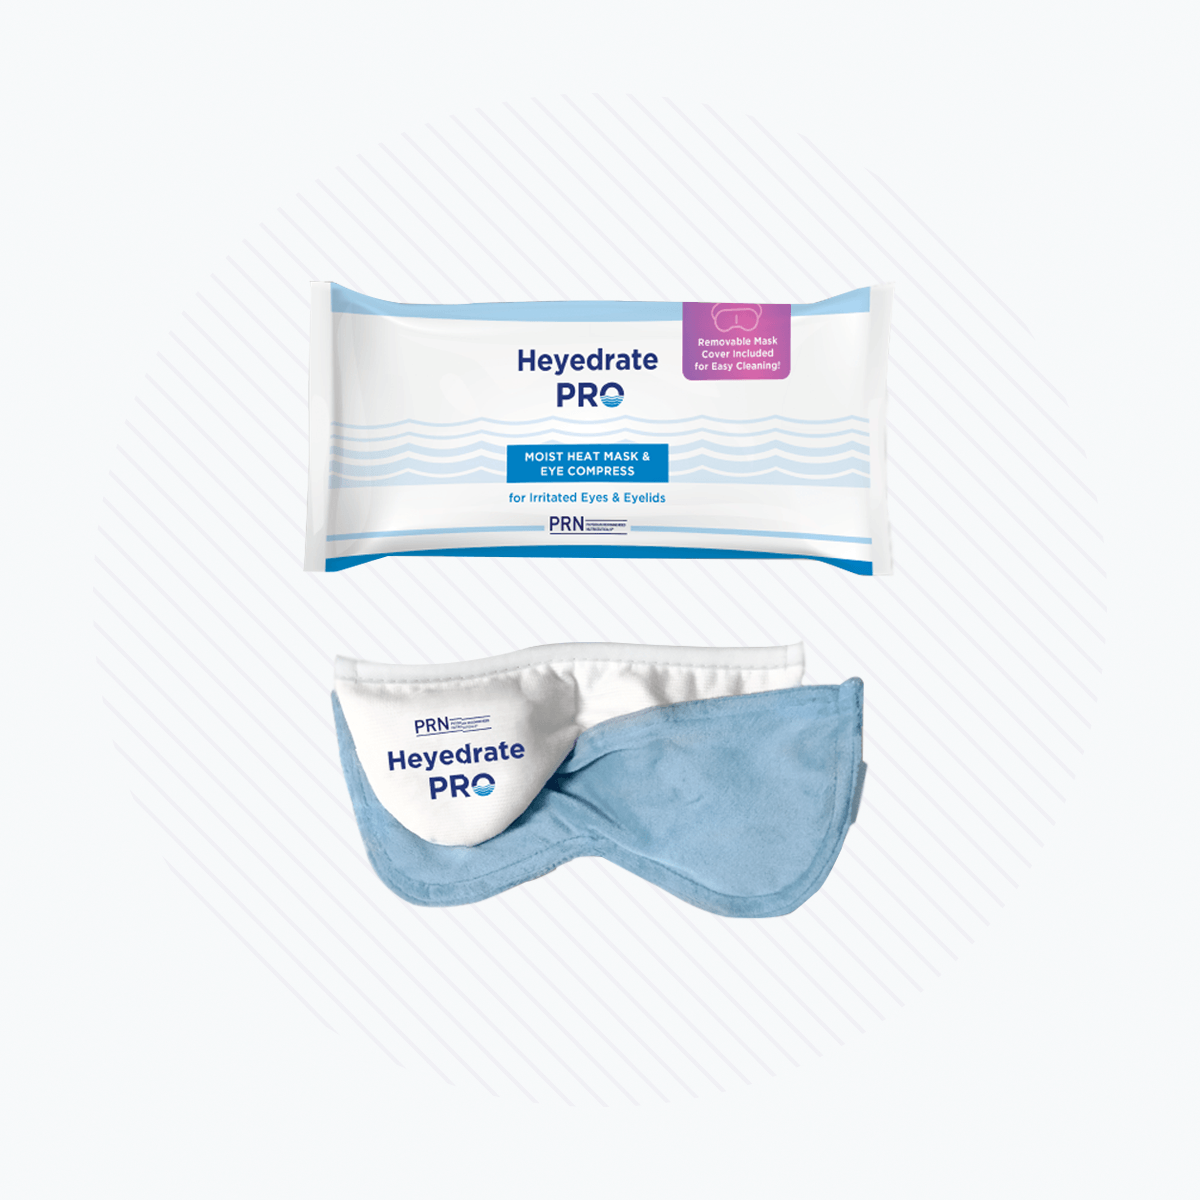 Heyedrate Pro by PRN Heat Mask with Cover for Dry Eyes - Dryeye Rescue